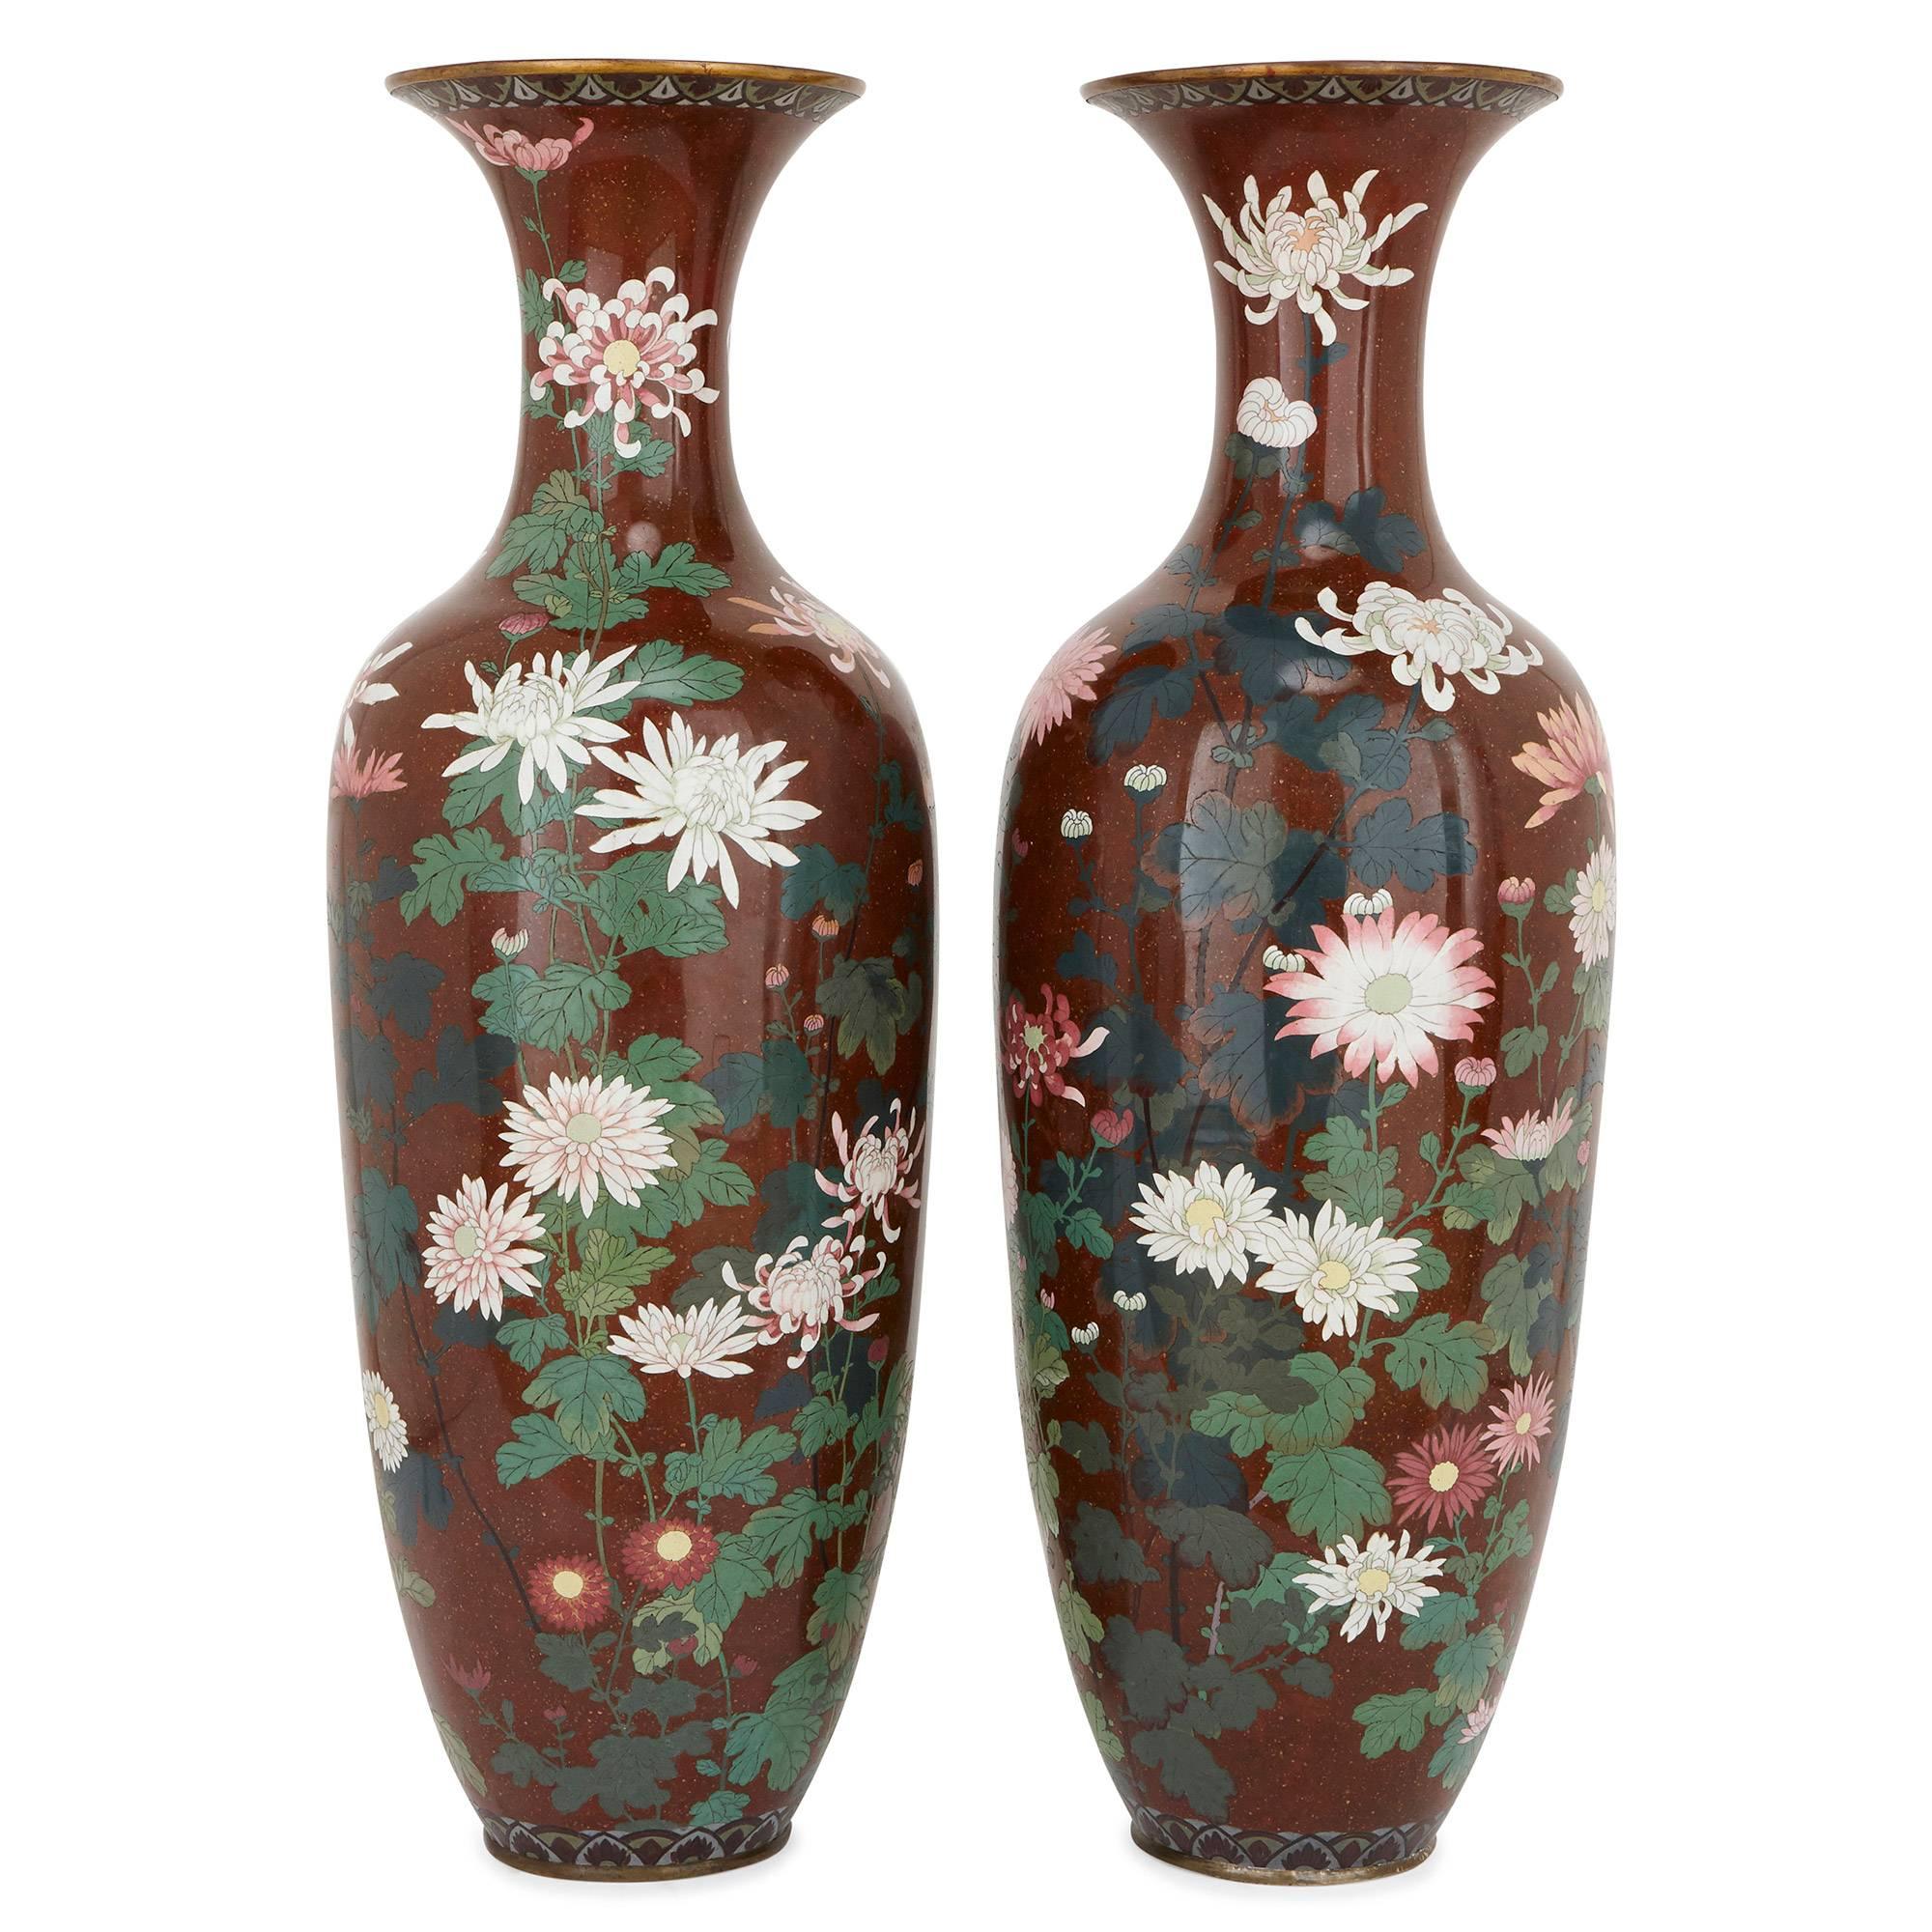 These beautiful Japanese vases were crafted during the Meiji period of the late 19th Century, which was referred to as the Golden Age of cloisonne enameling. 

The vases are of elongated ovoid shape, with waisted necks and flared rims. The vases